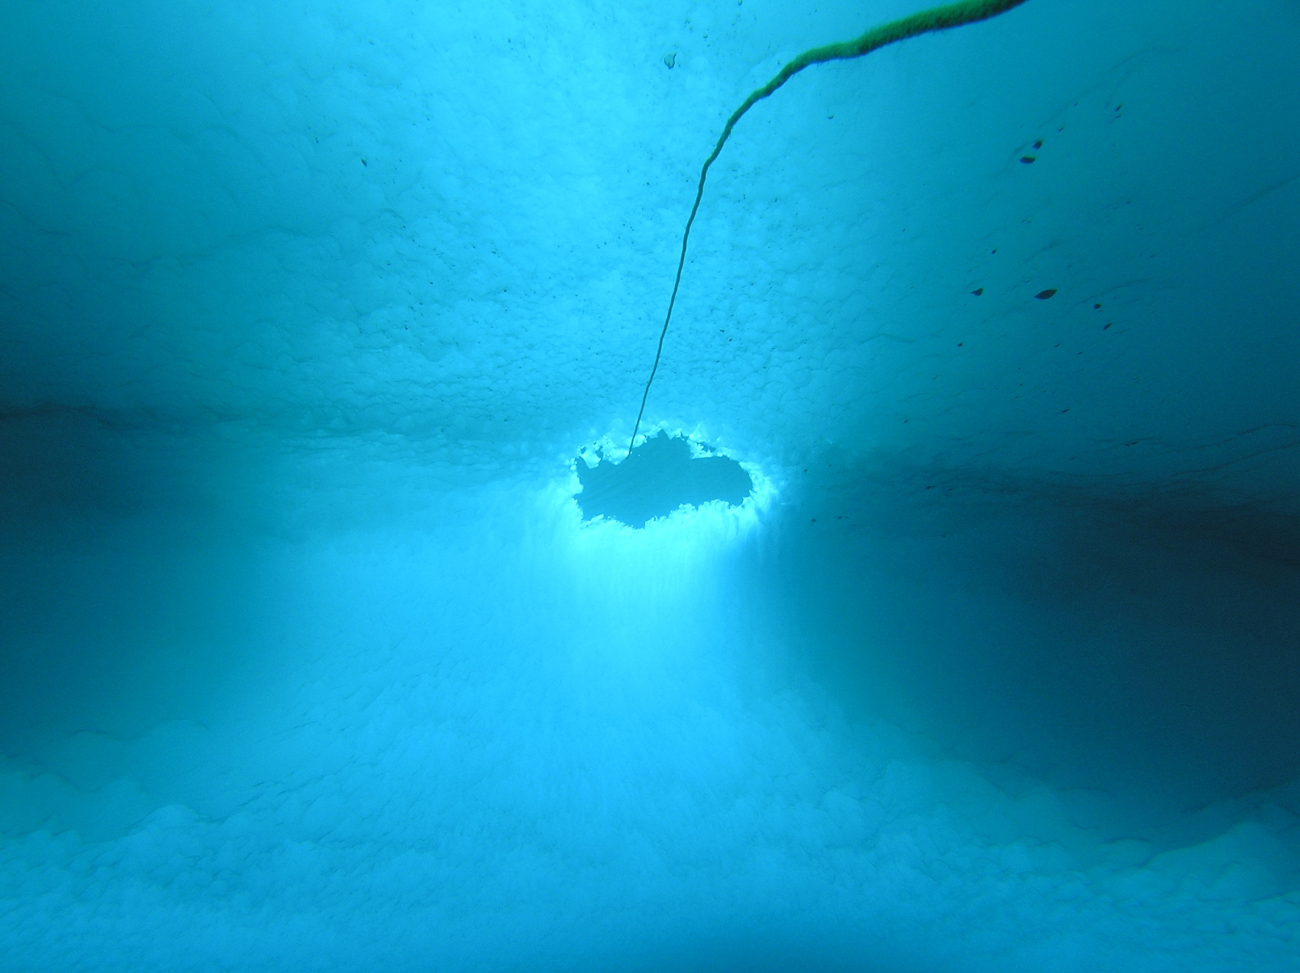 The dive entry and exit hole for under-ice divers